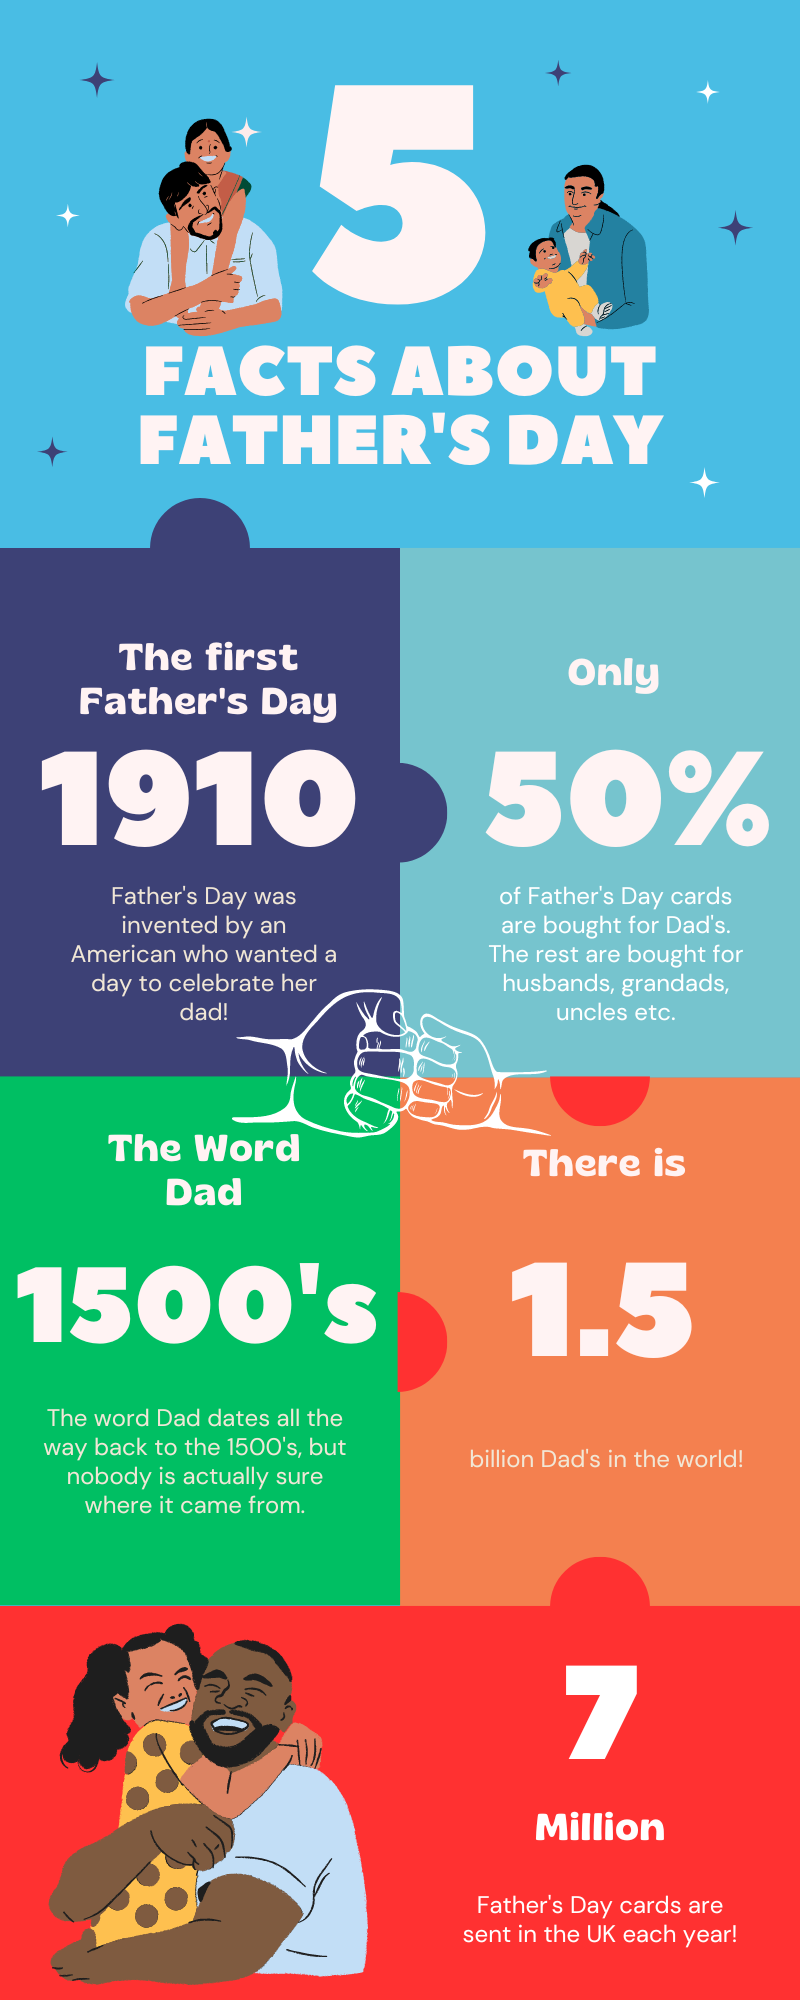 Fathers Day fun facts!